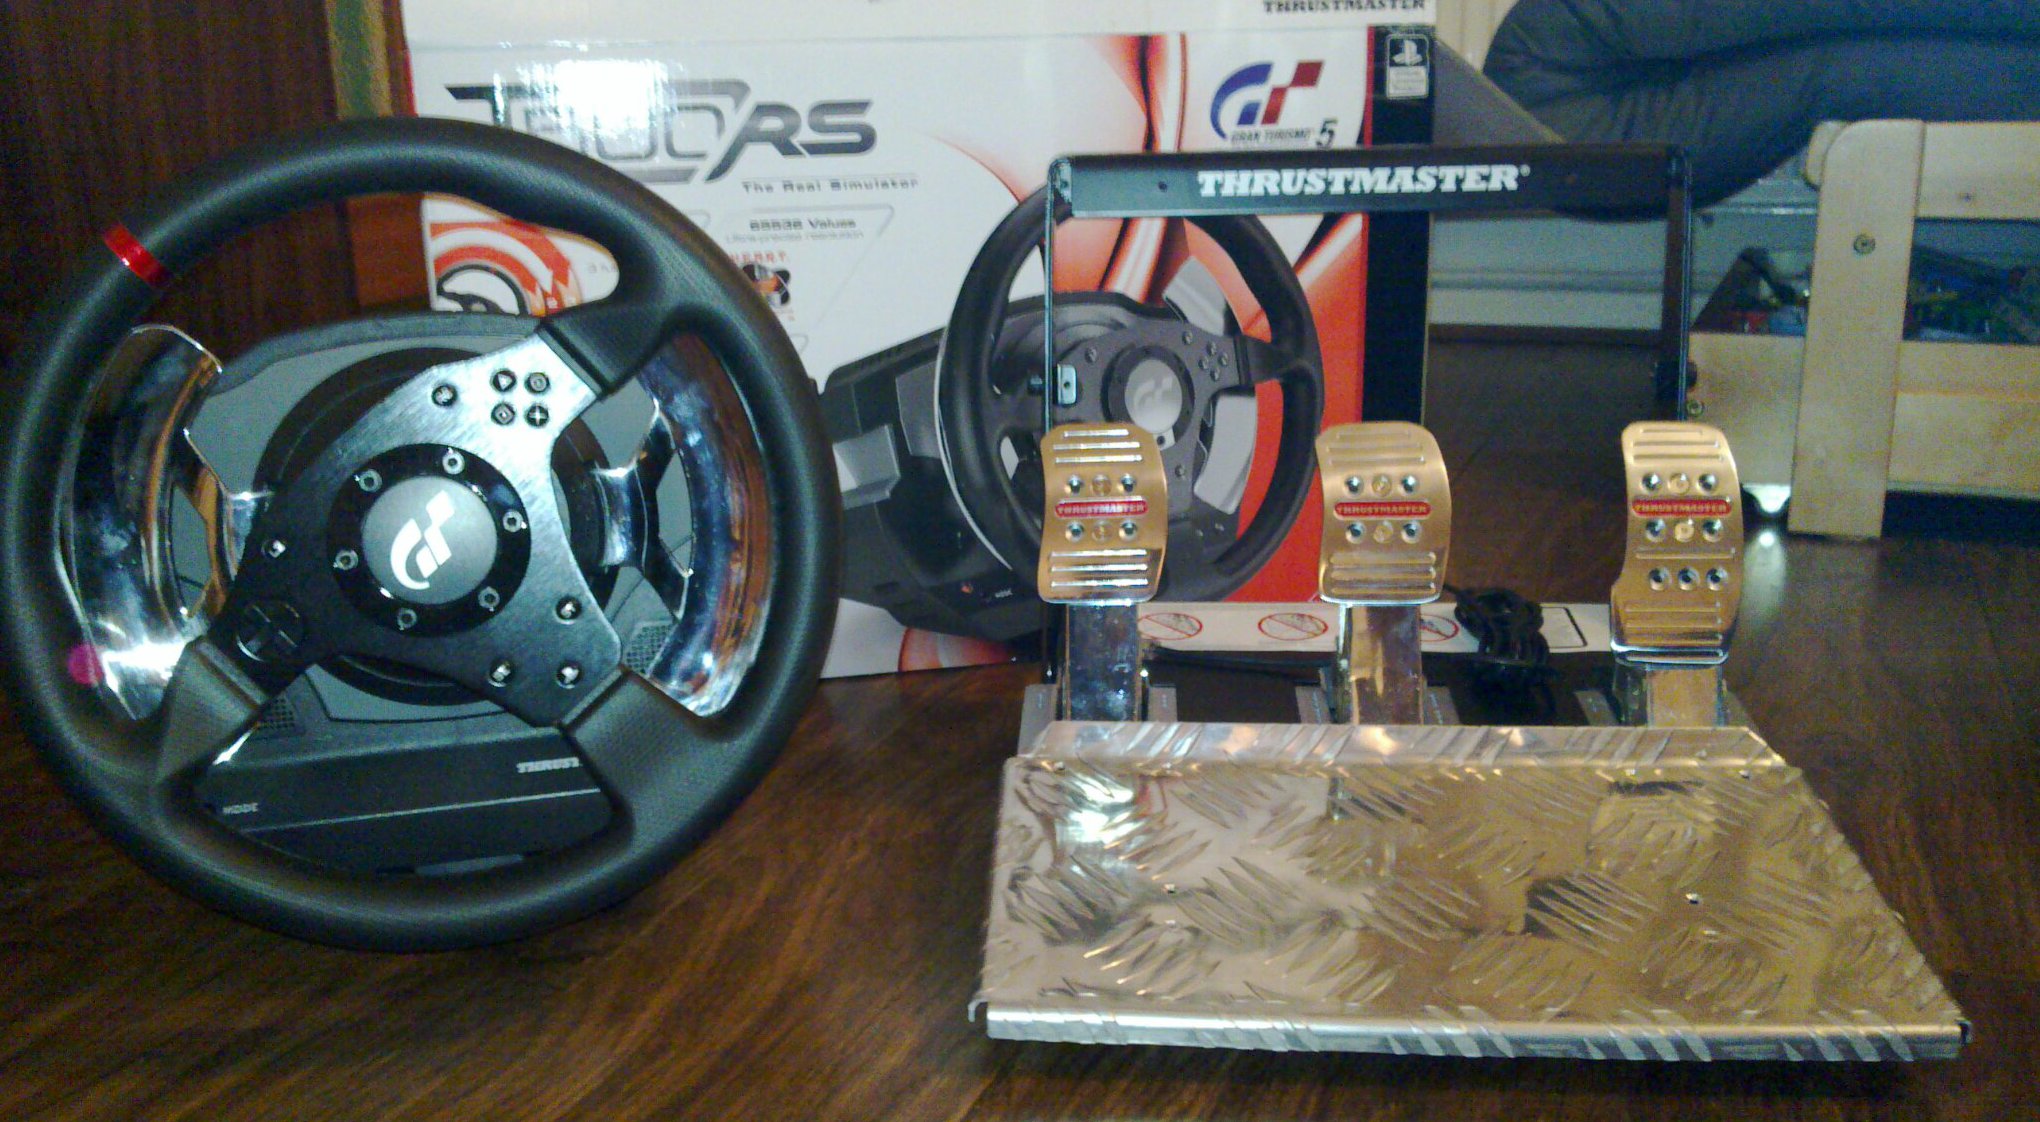 Thrustmaster T500 RS wheel and pedal set review | OnlineRaceDriver